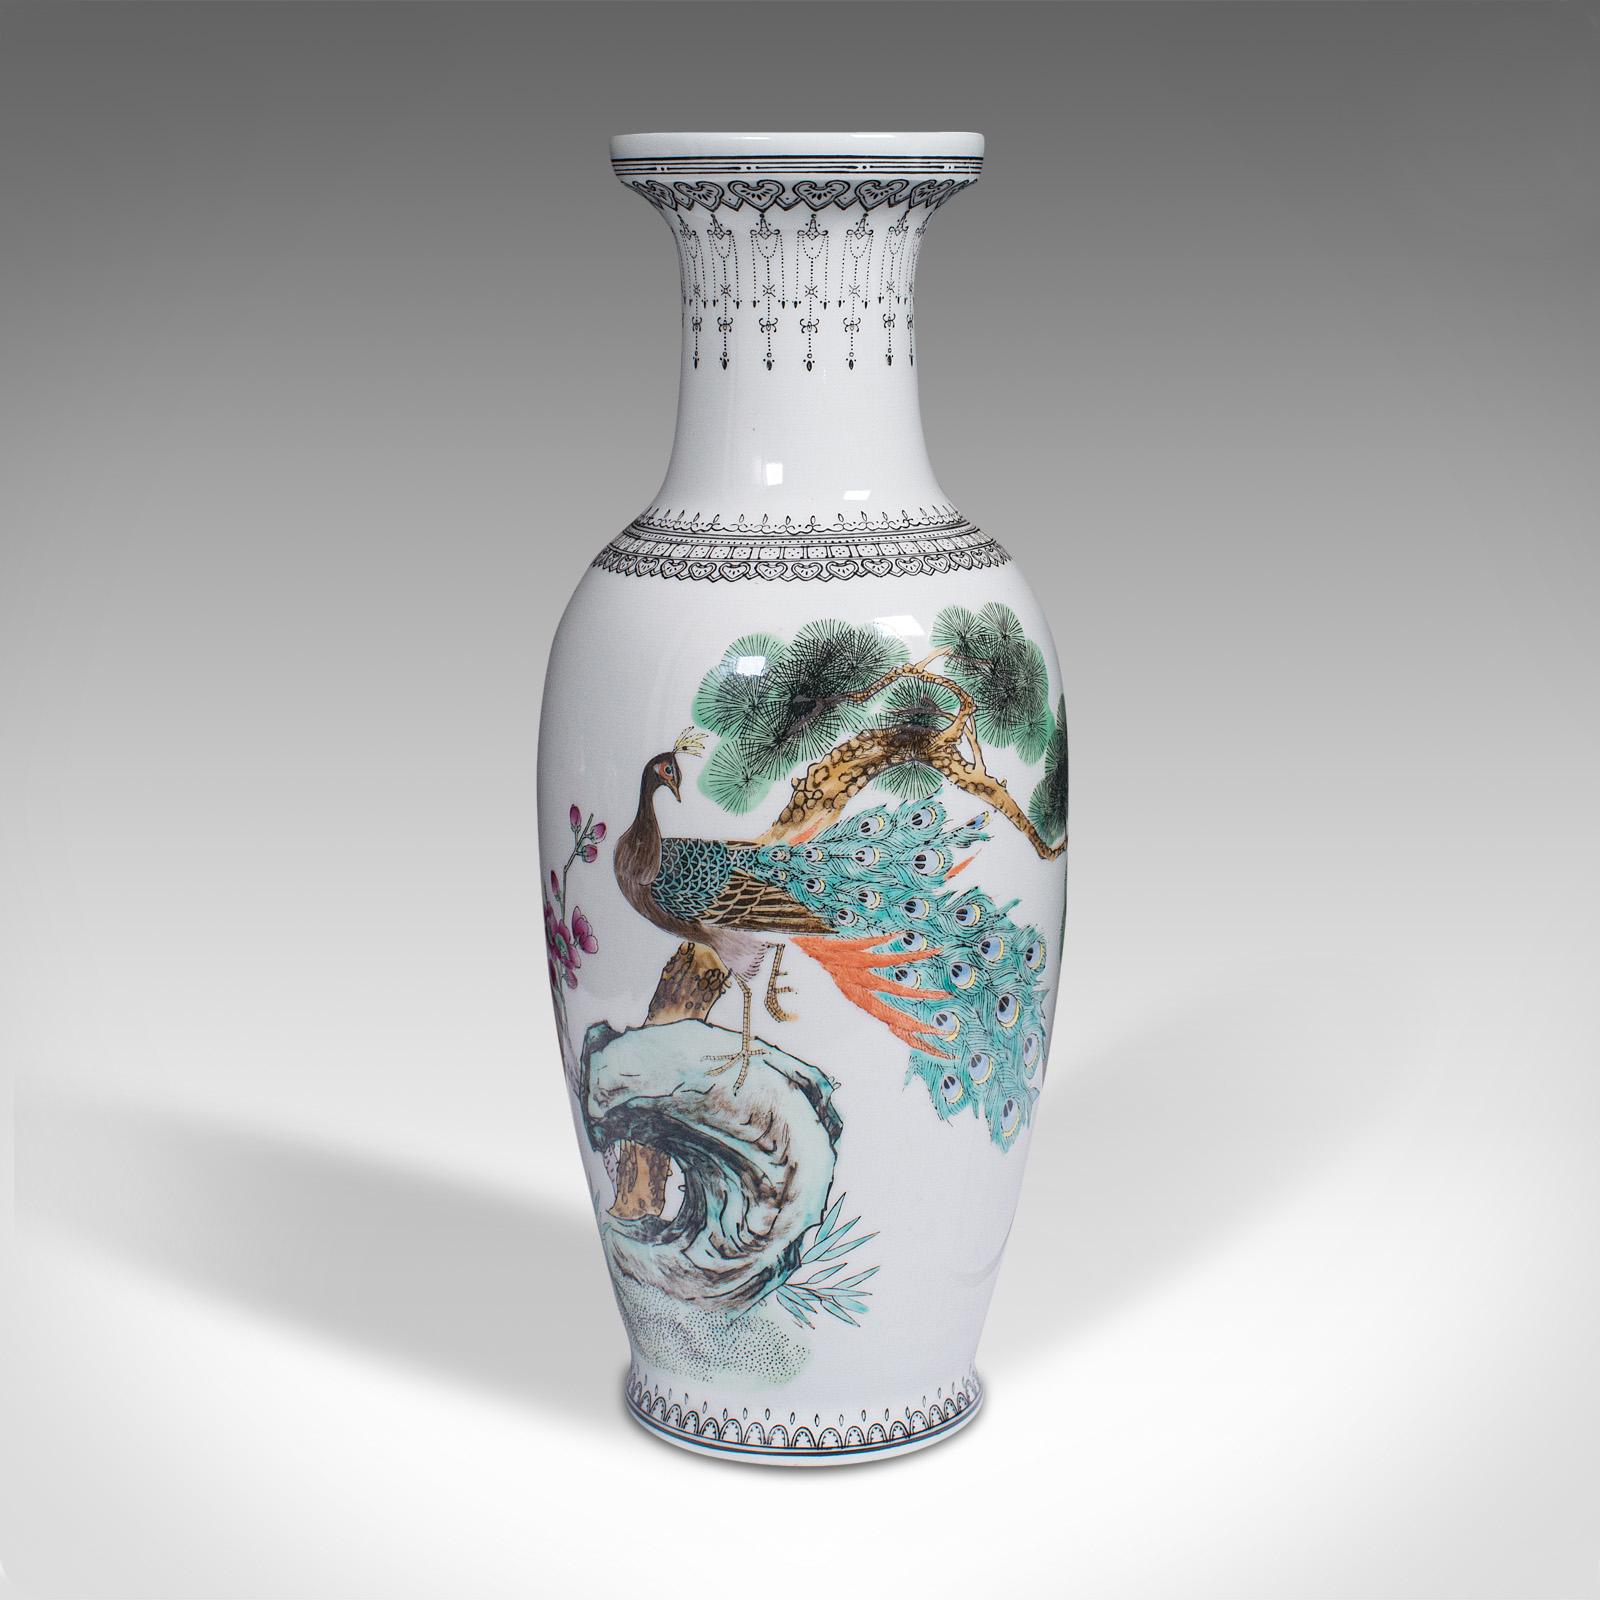 This is a vintage flower vase. A Chinese, ceramic decorative urn with peacock decor, dating to the mid 20th century, circa 1960. 

Cheerfully detailed vase with overt Oriental taste
Displaying a desirable aged patina throughout
Crisp white